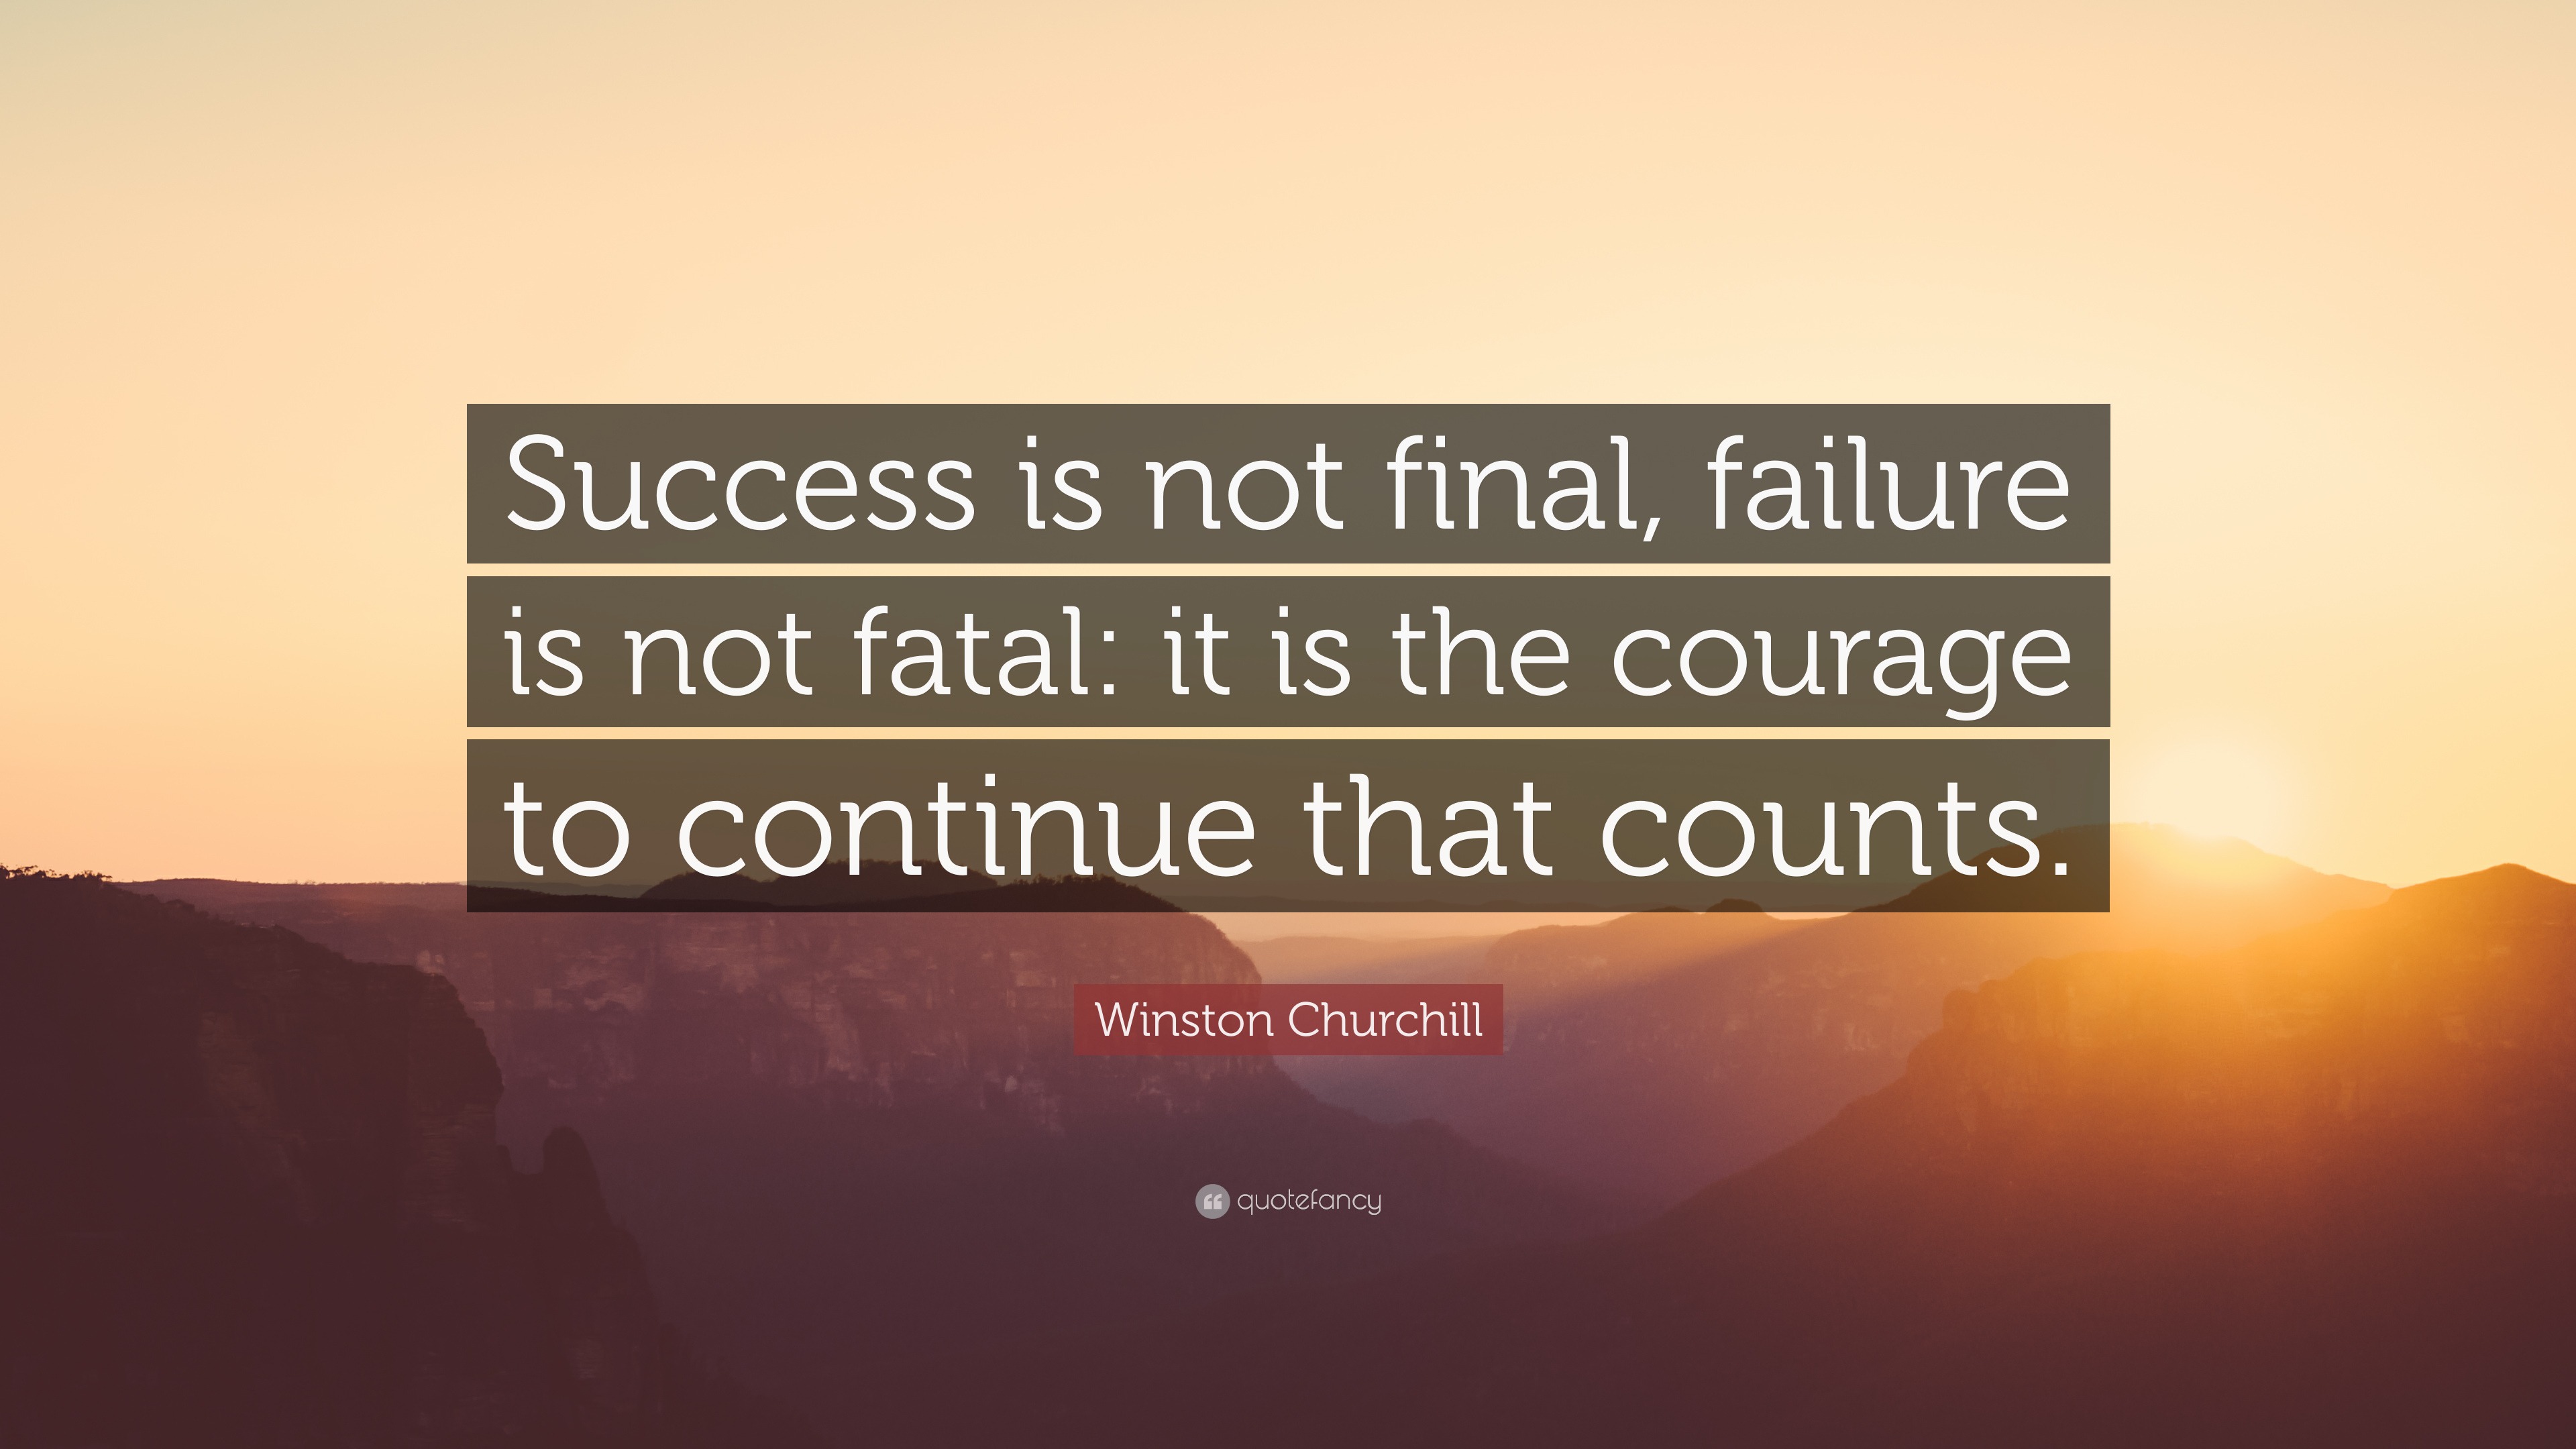 Winston Churchill Quote: “Success is not final, failure is not fatal